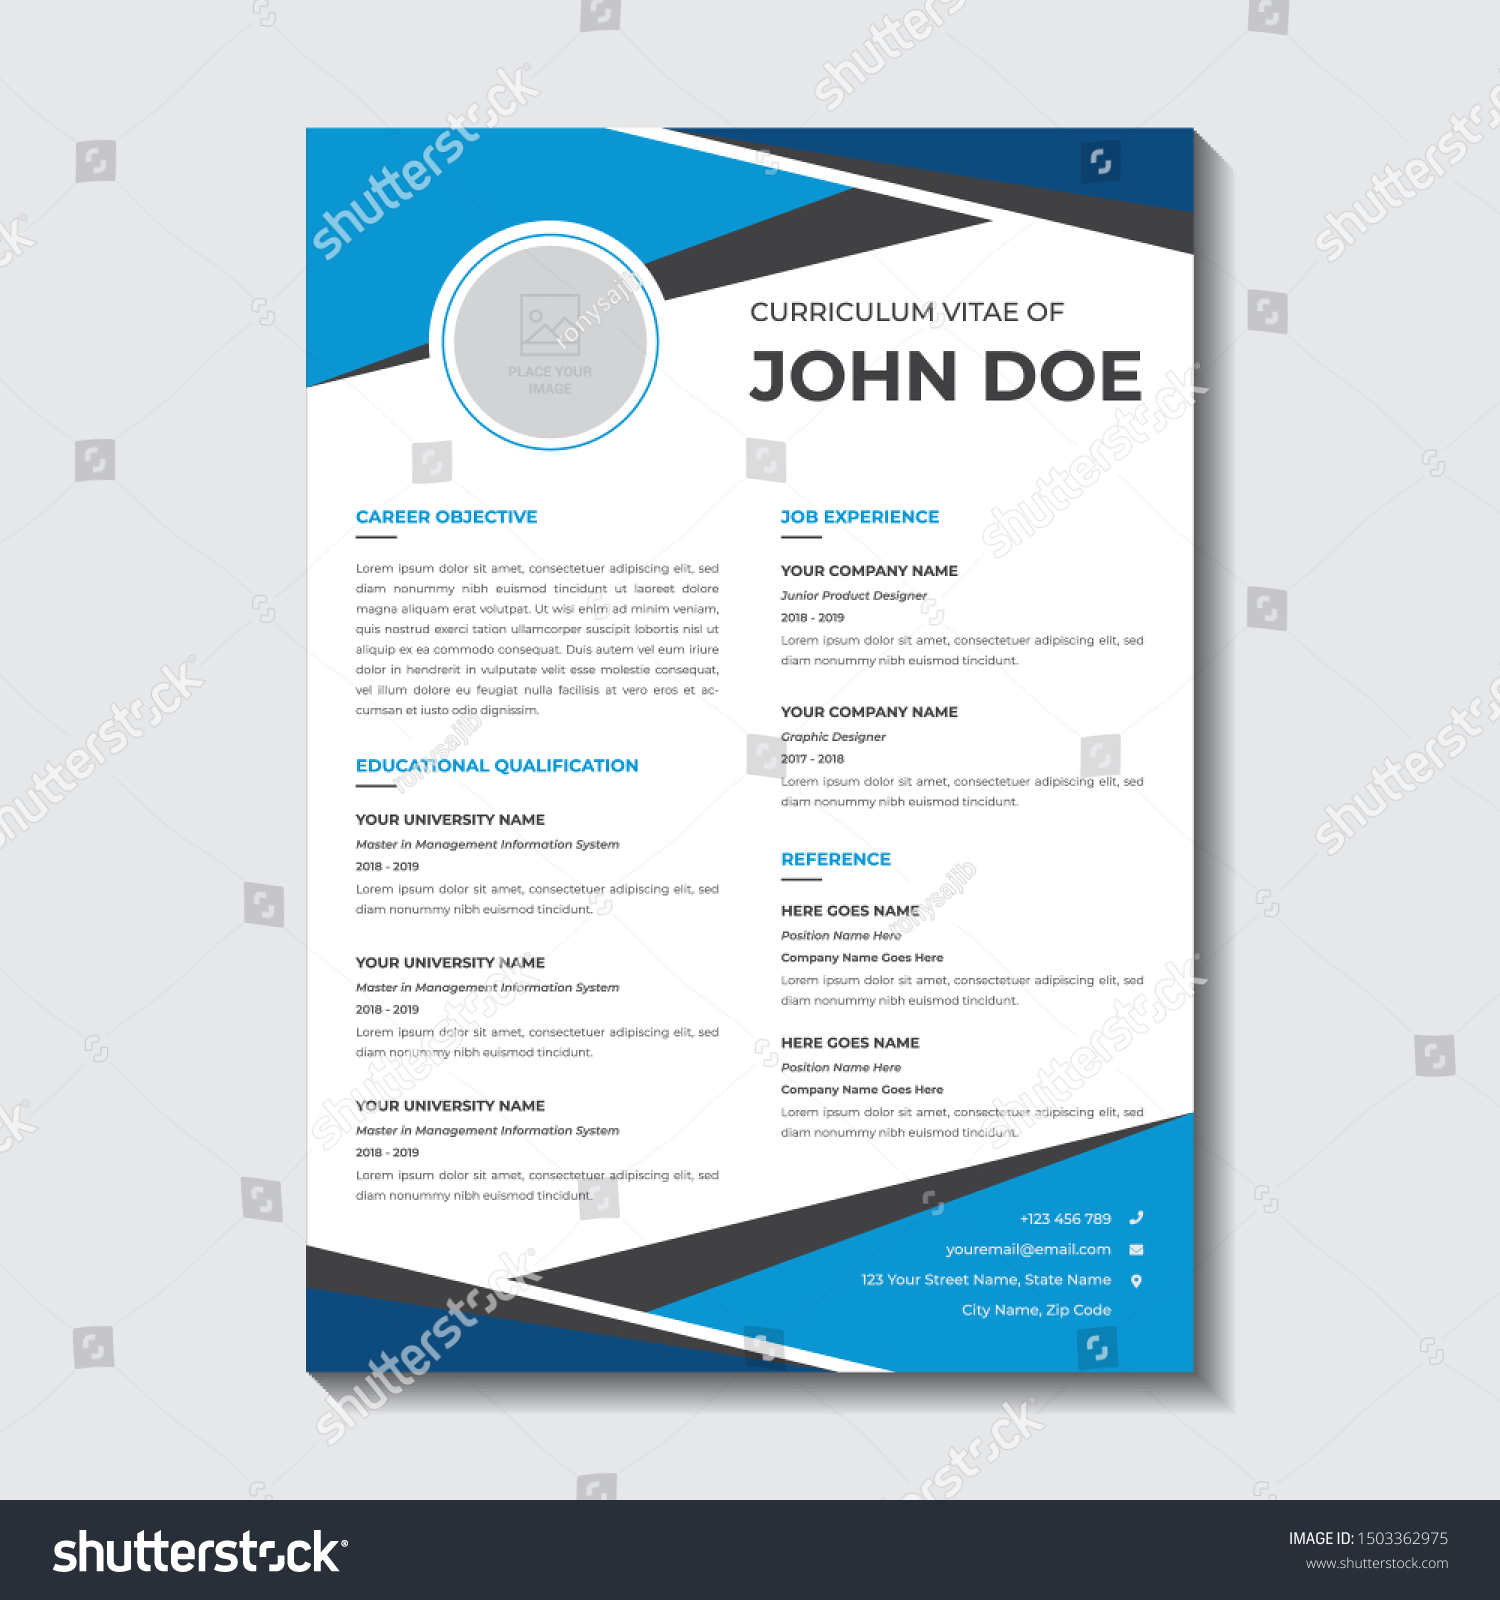 Single Page Resume Template from image.shutterstock.com